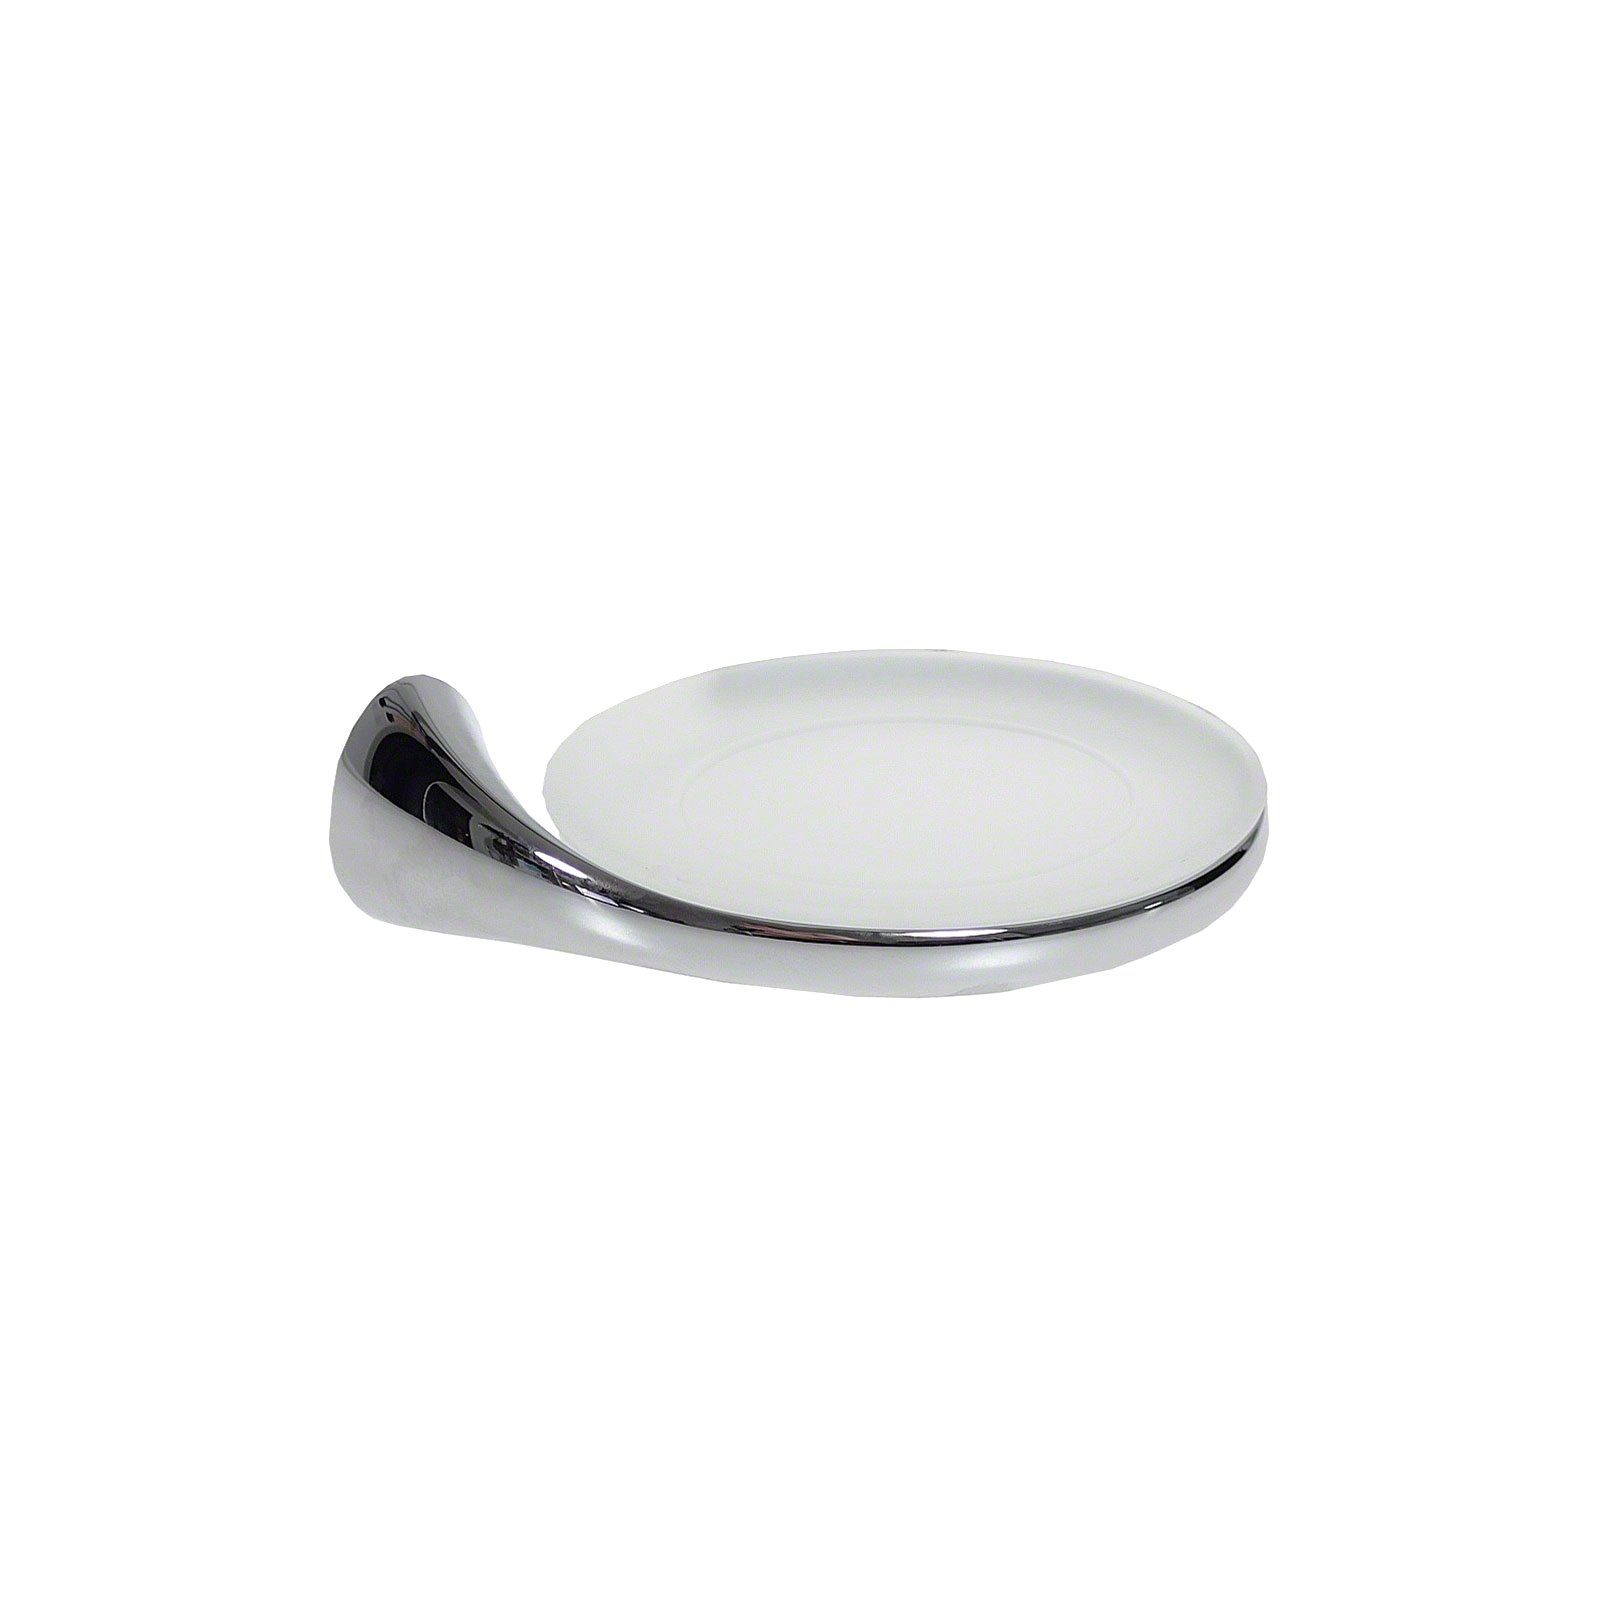 COLOMBO Badaccessoire-Set Dietsche Link by Colombo B2401 Chrom Seifenablage